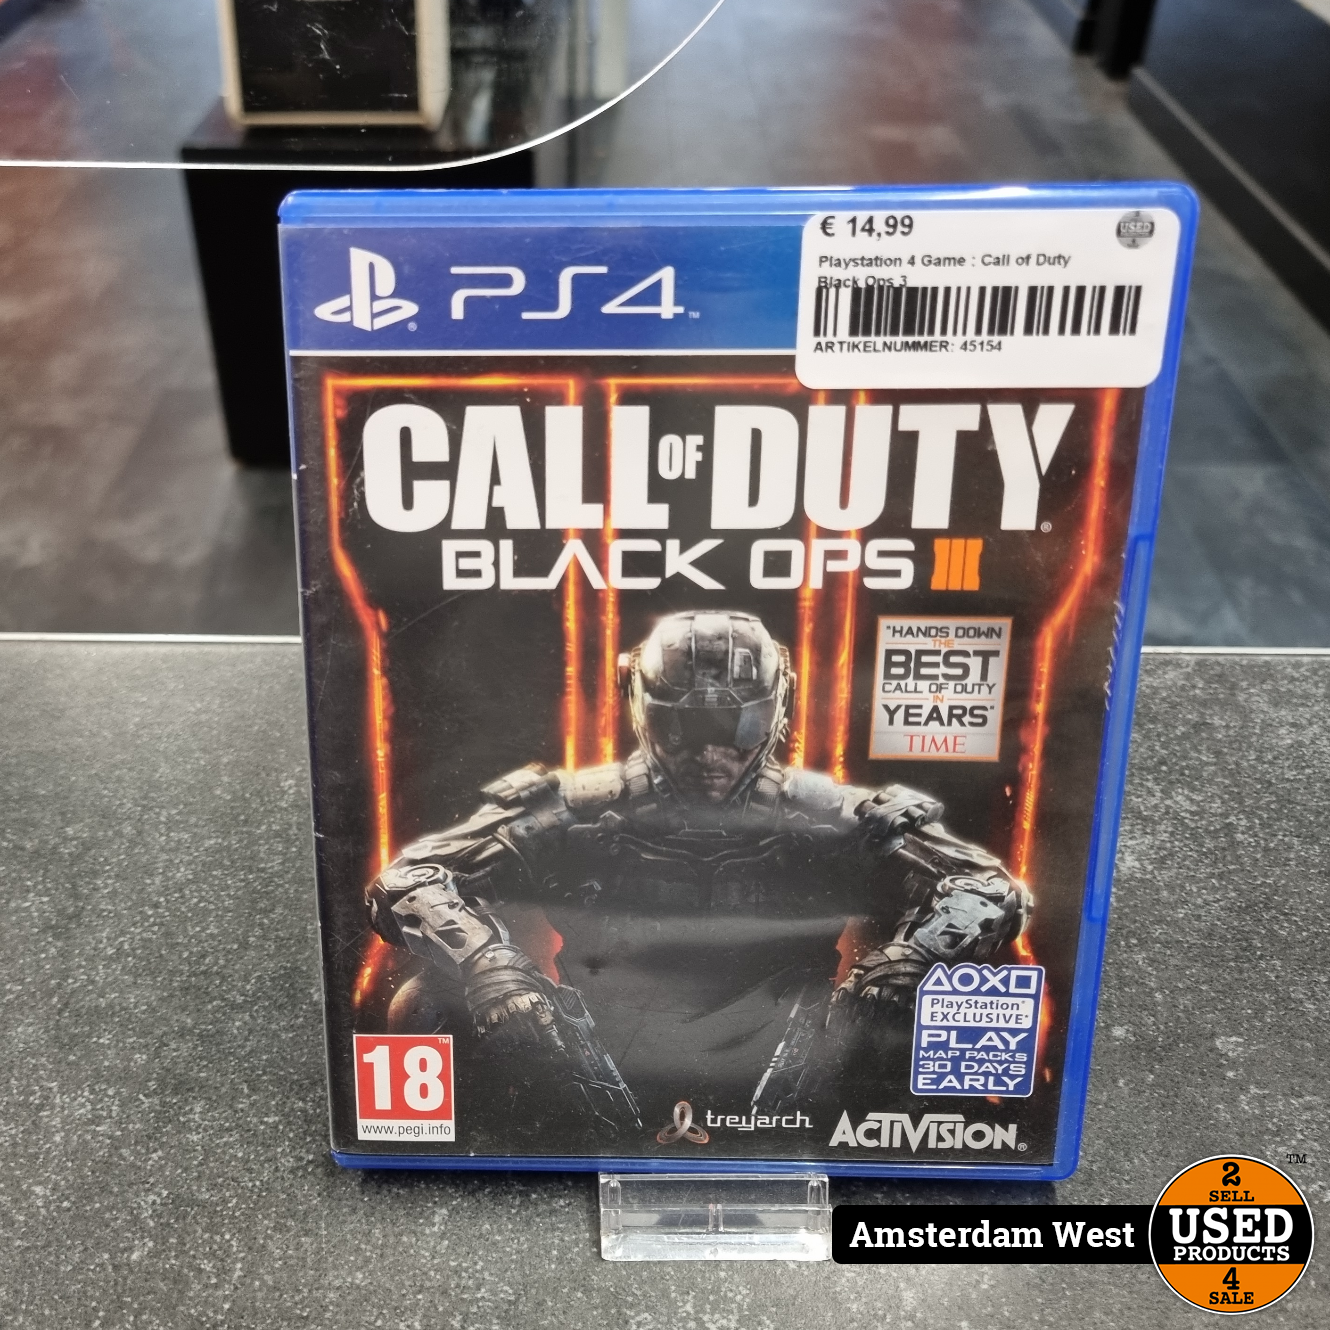 Liever zegevierend Waden Playstation 4 Game : Call of Duty Black Ops 3 - Used Products Amsterdam West